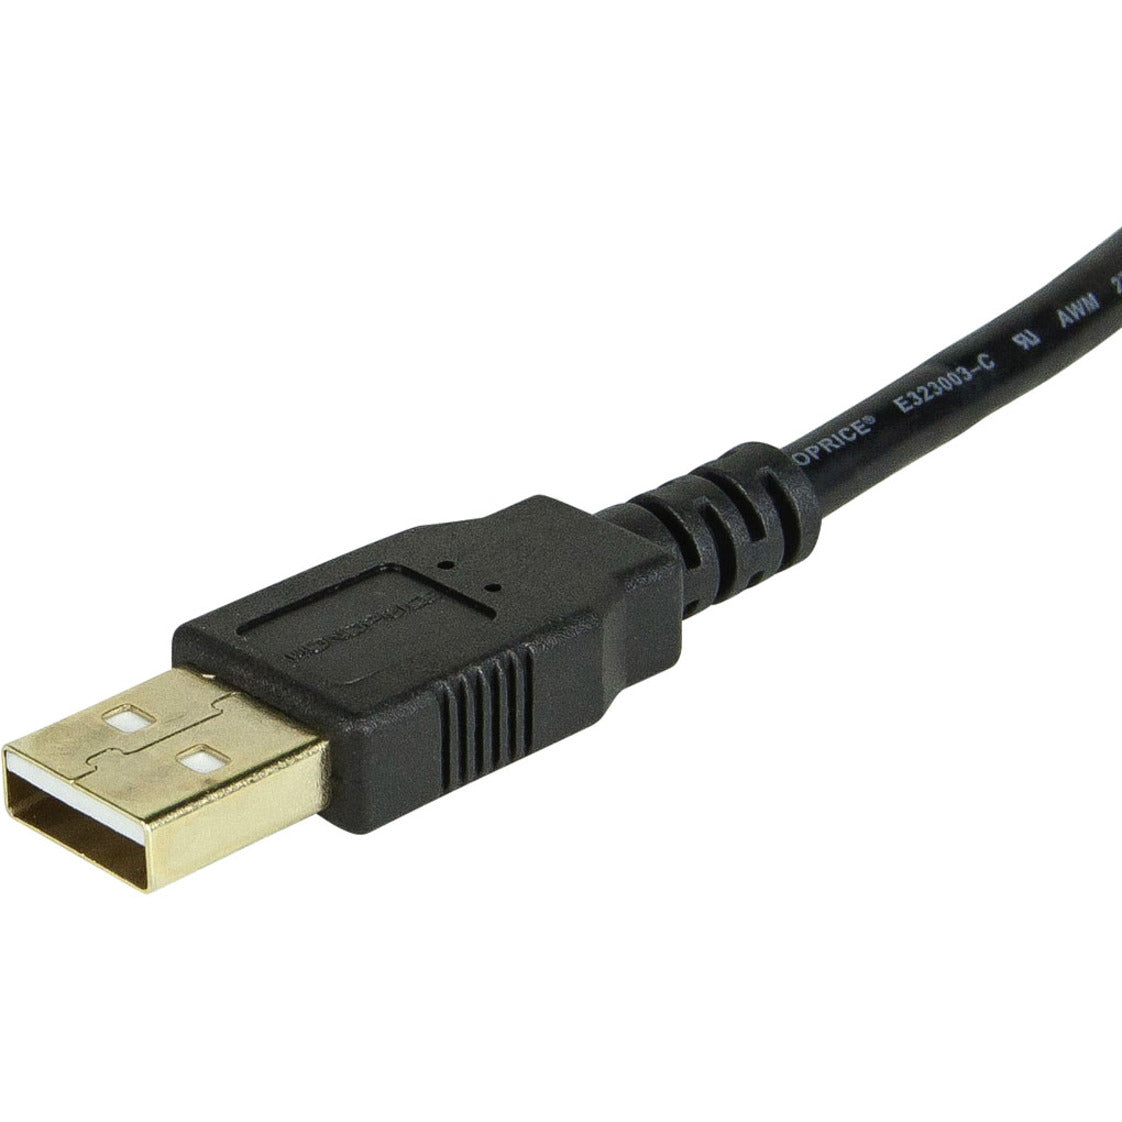 Monoprice 5433 6ft USB 2.0 A Male to A Female Extension Cable, Corrosion-Free, Gold Plated